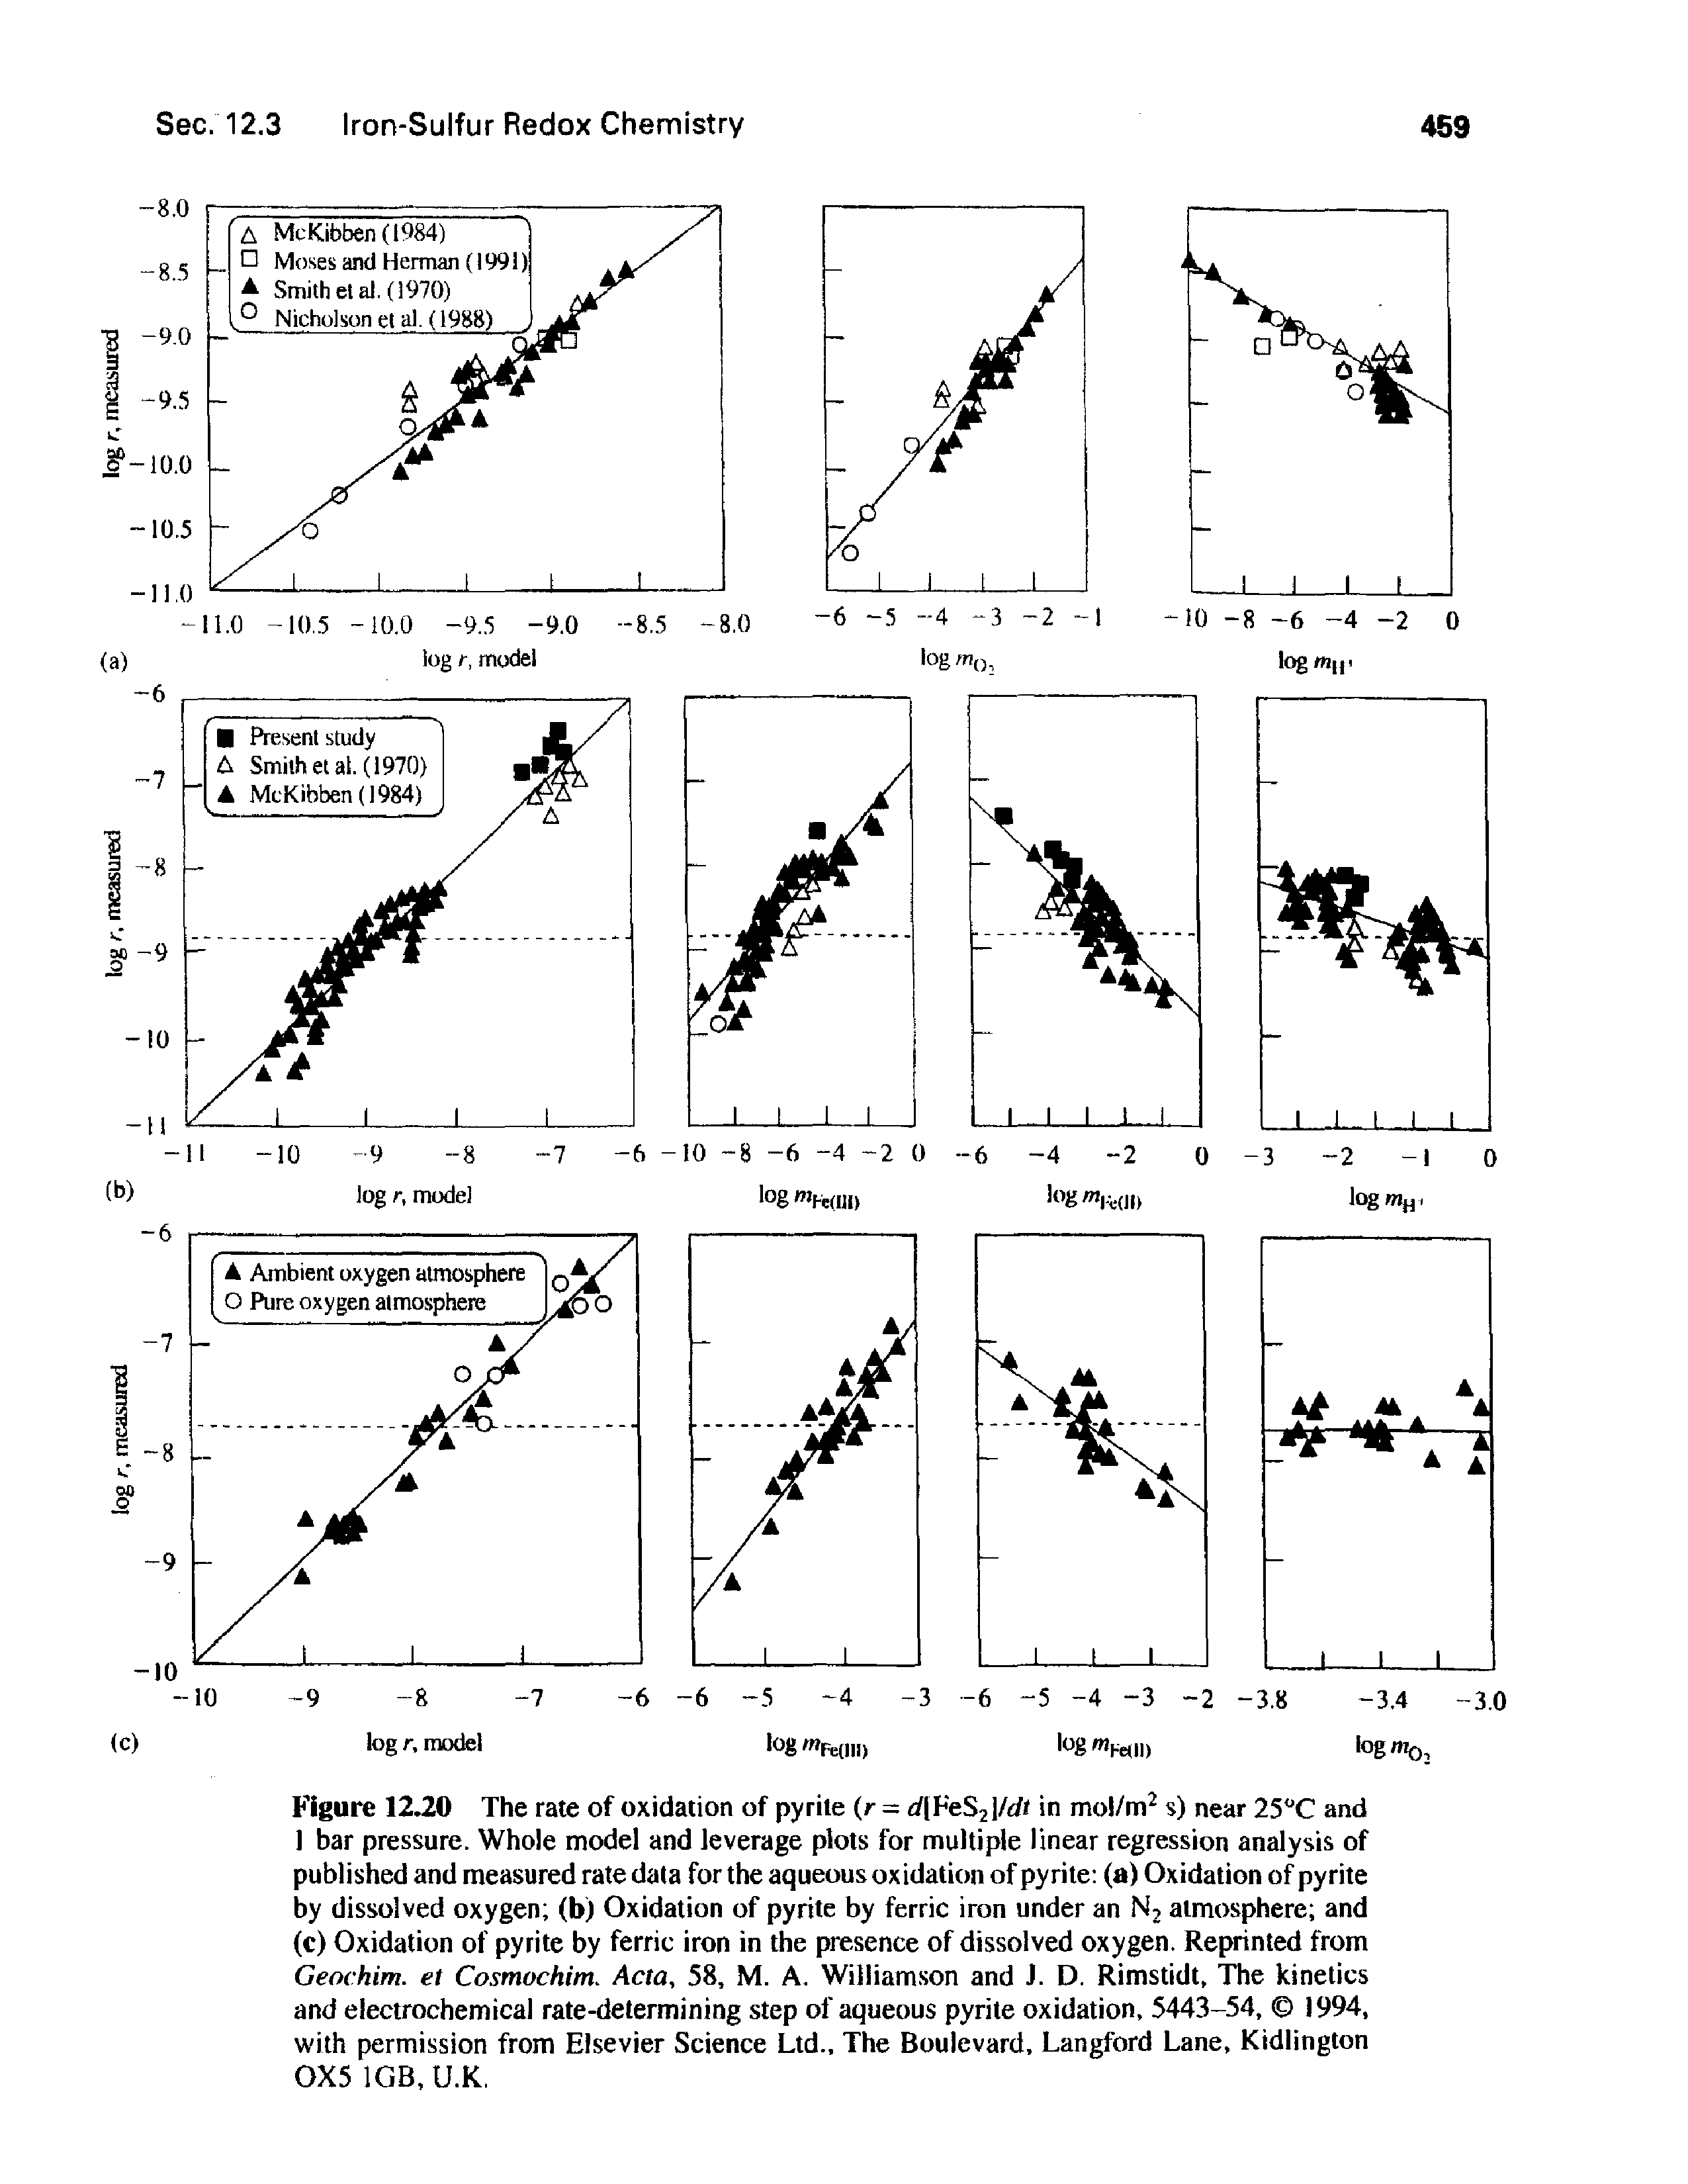 Figure 12.20 The rate of oxidation of pyrite (r = rf(FeS2l/t/< in mo /m s) near 25"C and 1 bar pressure. Whole model and leverage plots for multiple linear regression analysis of published and measured rate data for the aqueous oxidation of pyrite (a) Oxidation of pyrite by dissolved oxygen (b) Oxidation of pyrite by ferric iron under an N2 atmosphere and (c) Oxidation of pyrite by ferric iron in the presence of dissolved oxygen. Reprinted from Geochim. et Cosmochim. Acta, 58, M. A. Williamson and J. D. Rimstidt, The kinetics and electrochemical rate-determining step of aqueous pyrite oxidation, 5443-54, 1994, with permission from Elsevier Science Ltd., The Boulevard, Langford Lane, Kidlington 0X5 1GB, U.K.